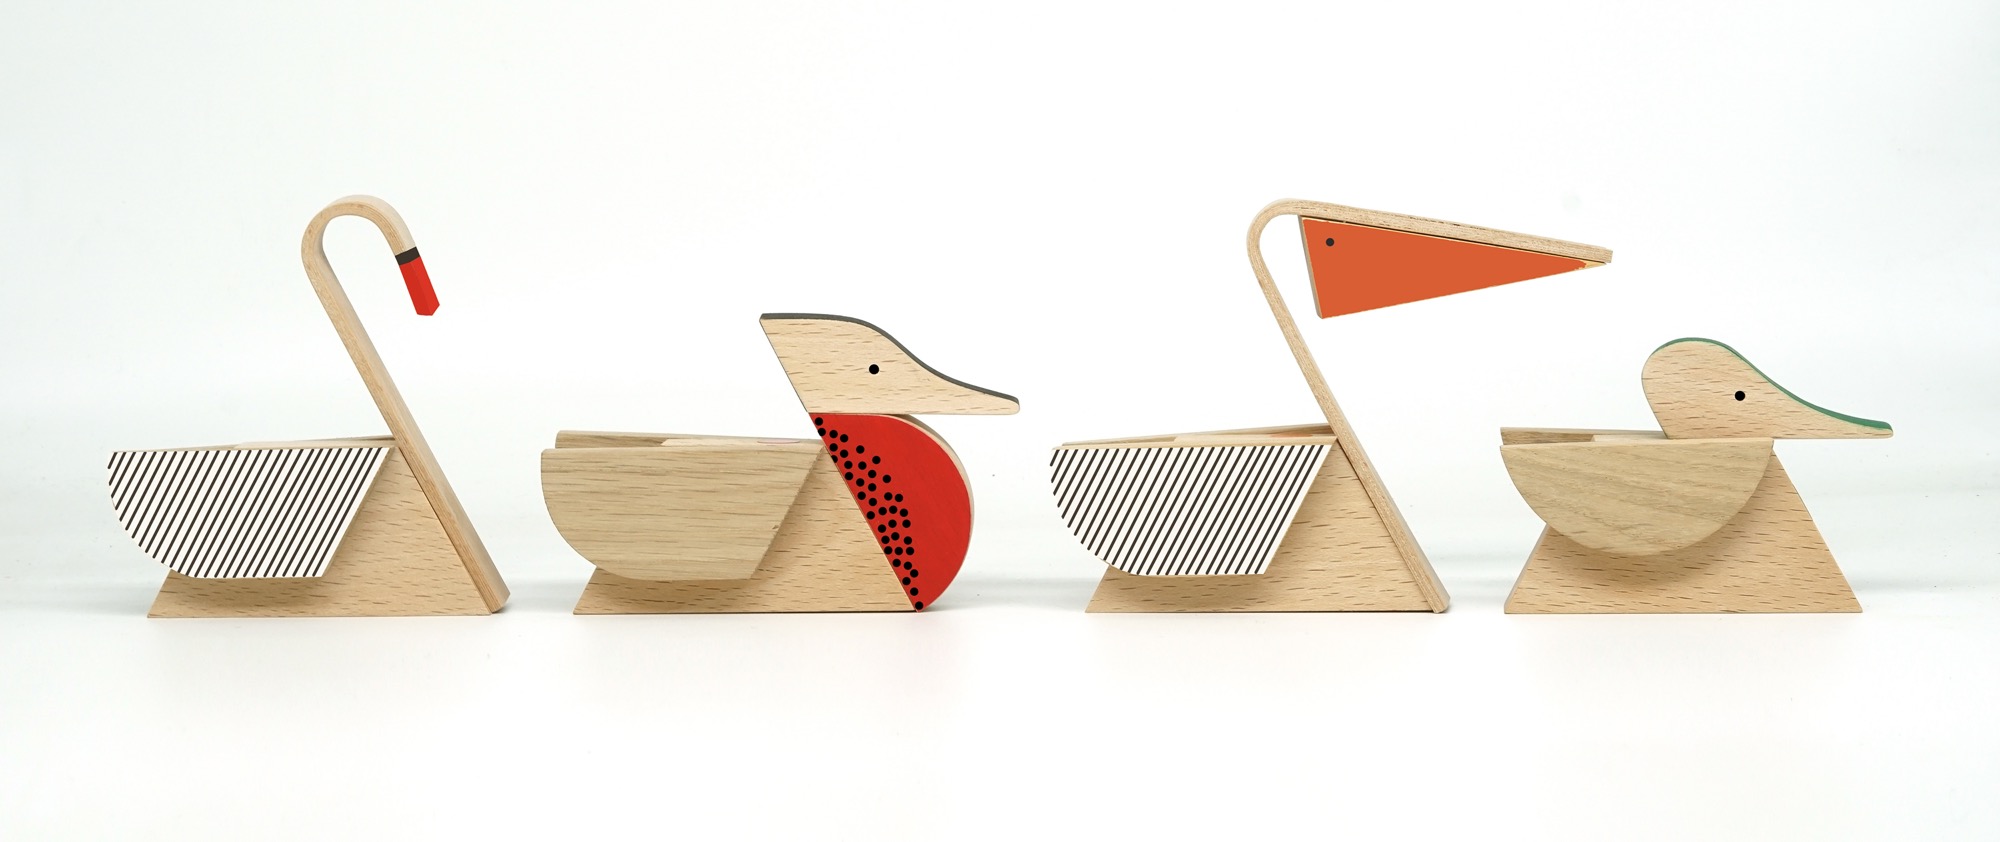 geometric wooden toys shaped like a series of waterfowl